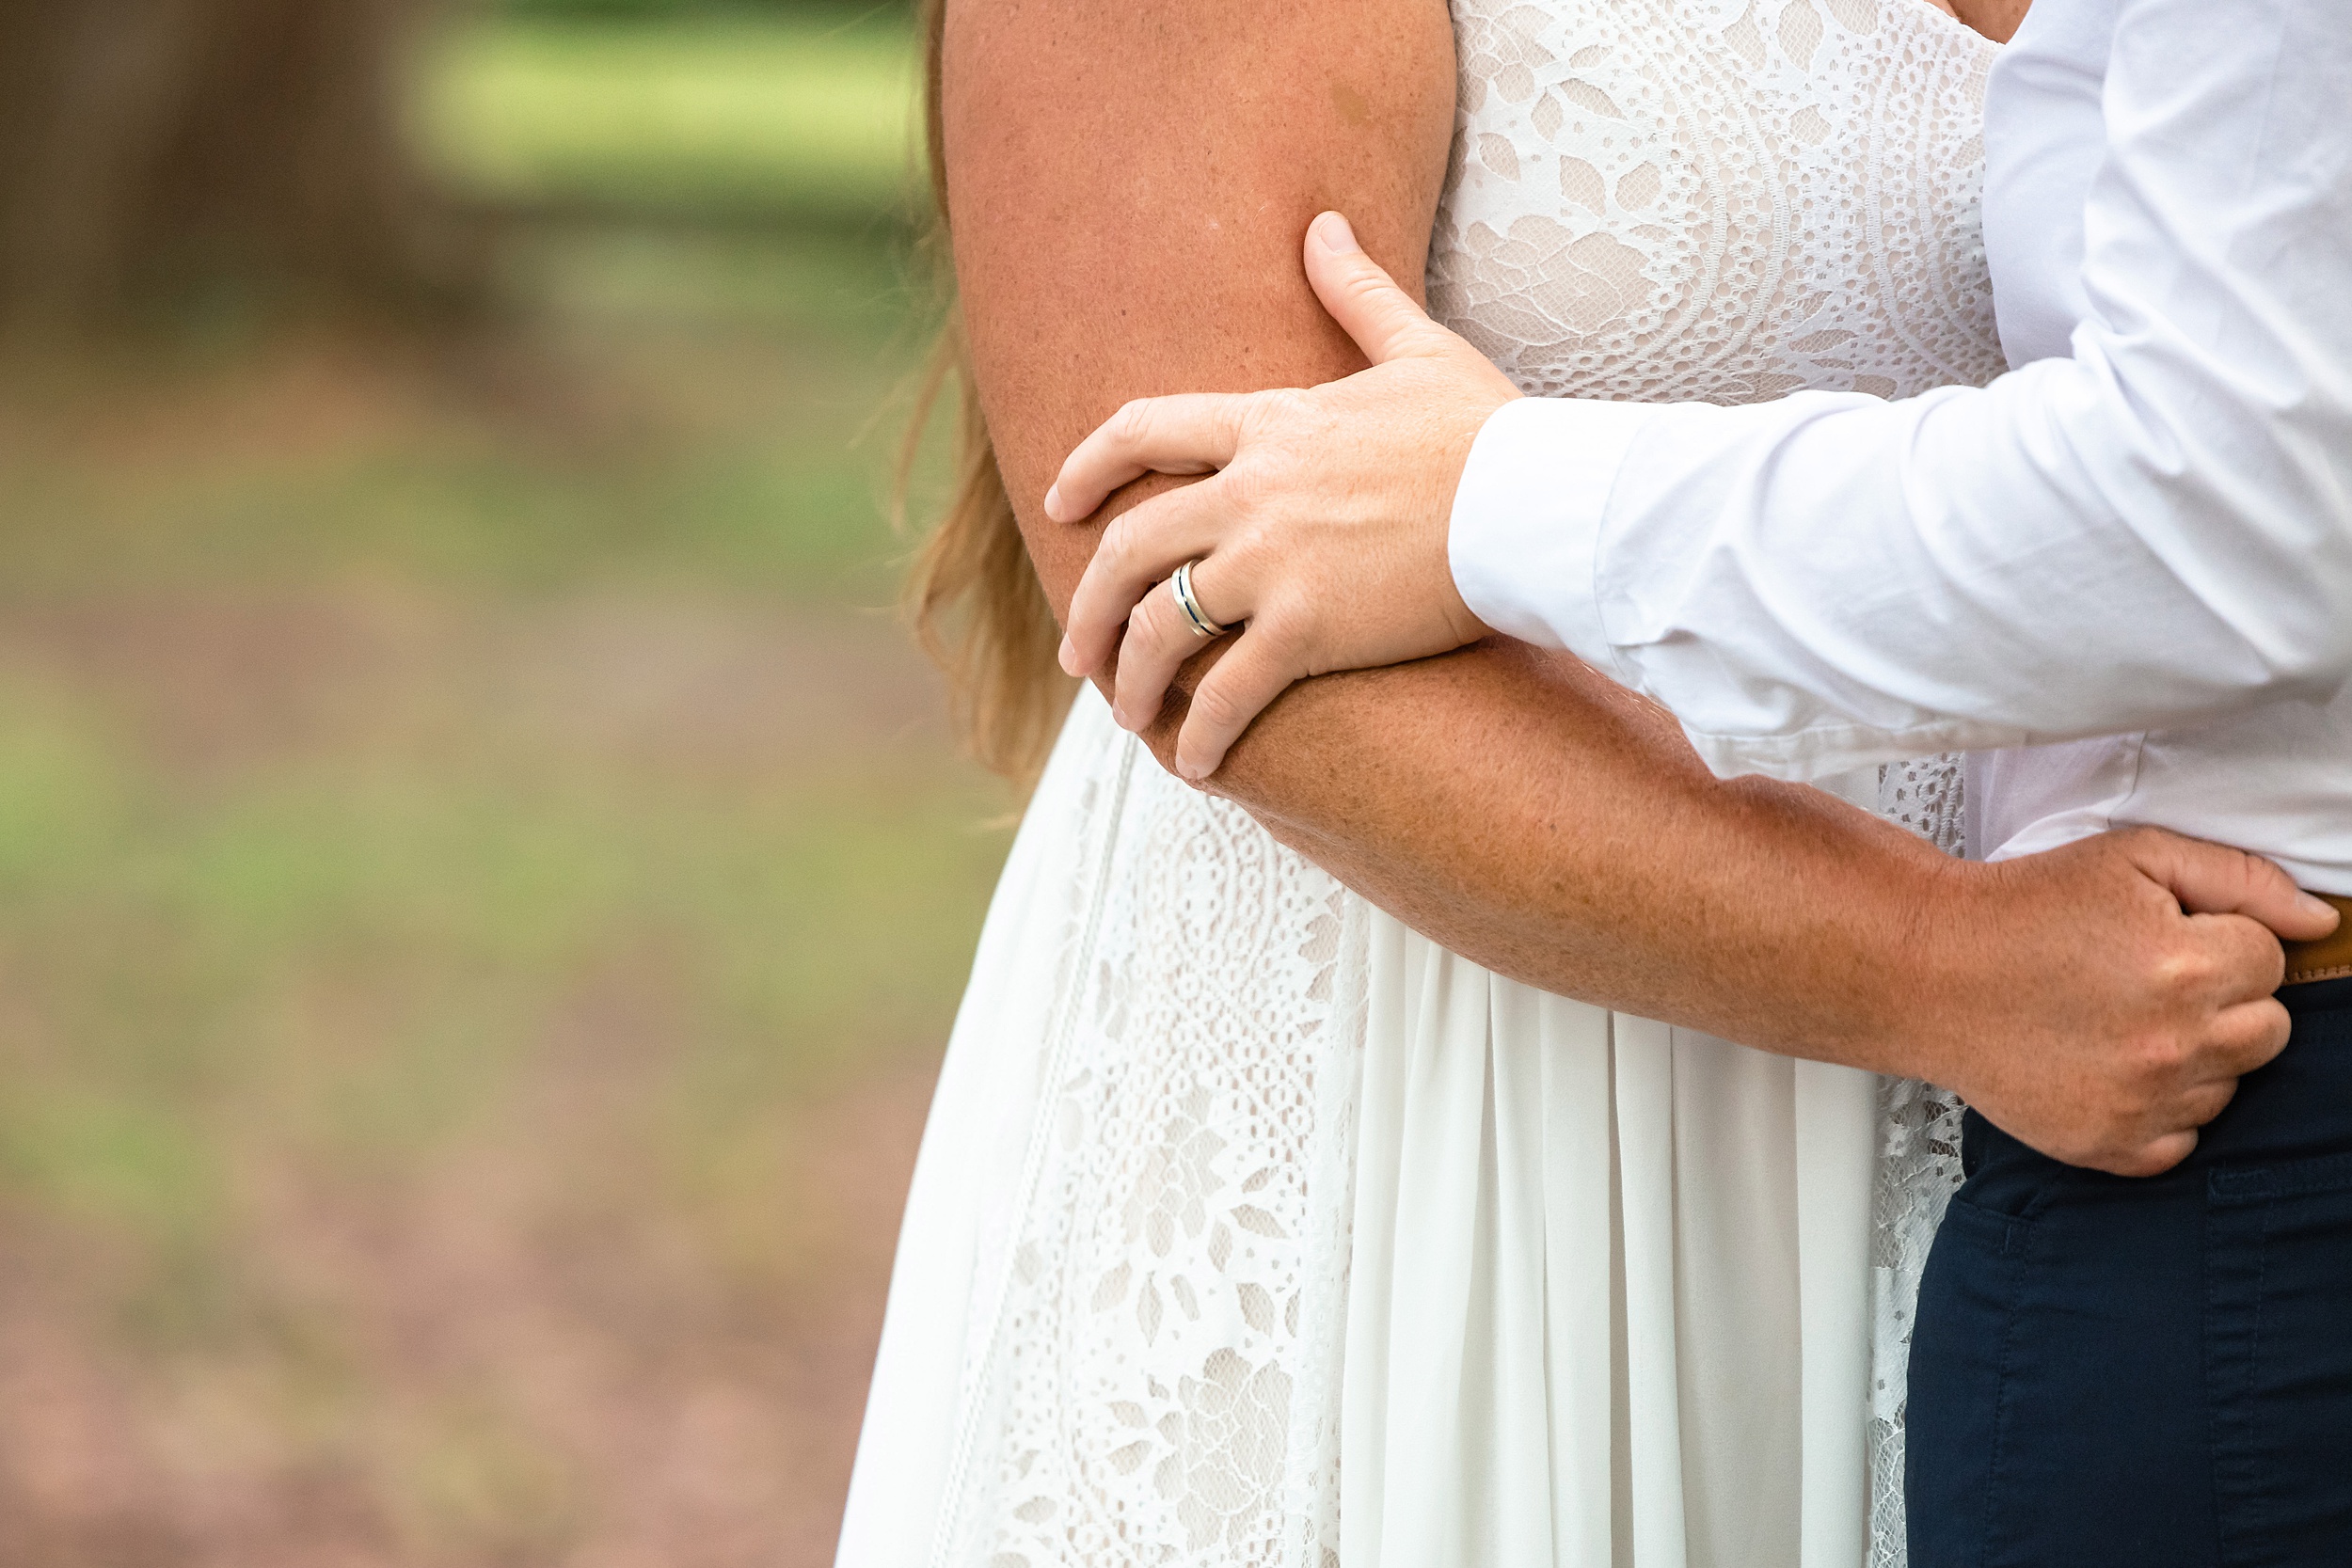 Newlyweds hold on to each other while standing outside under some trees